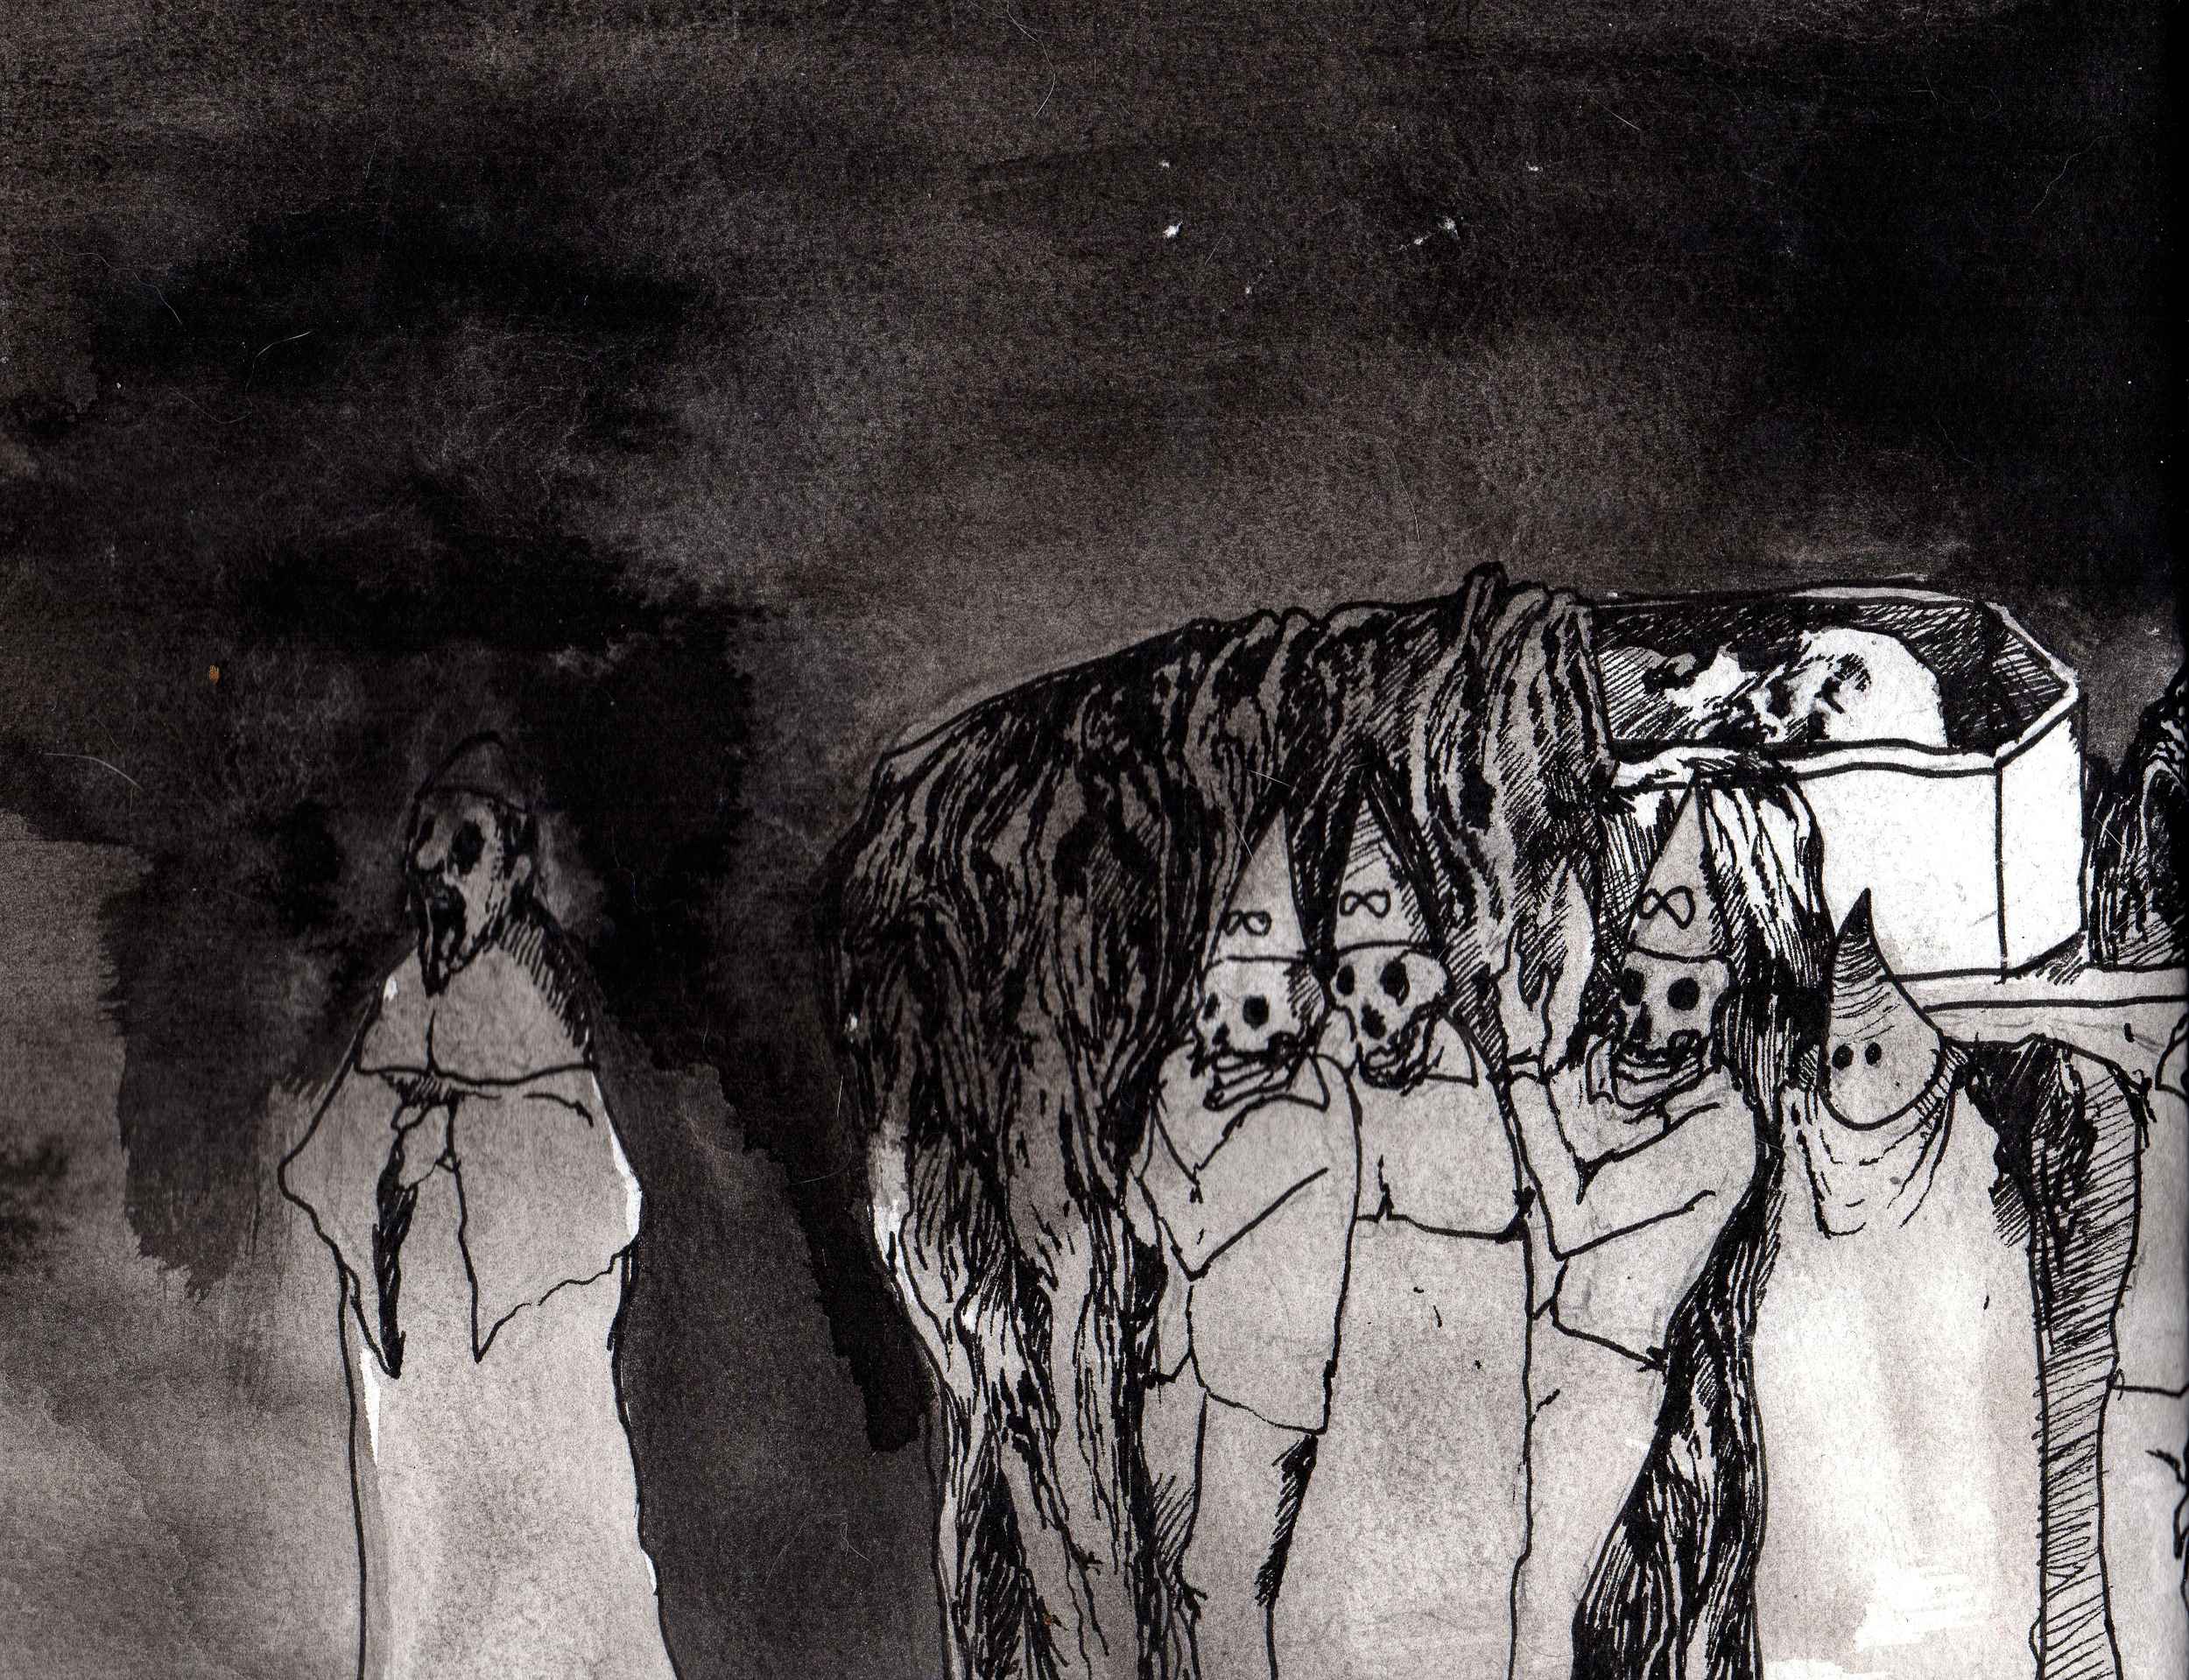    Given to the Grave  . 2013. 14 x 11 inches. Ink wash on paper. 